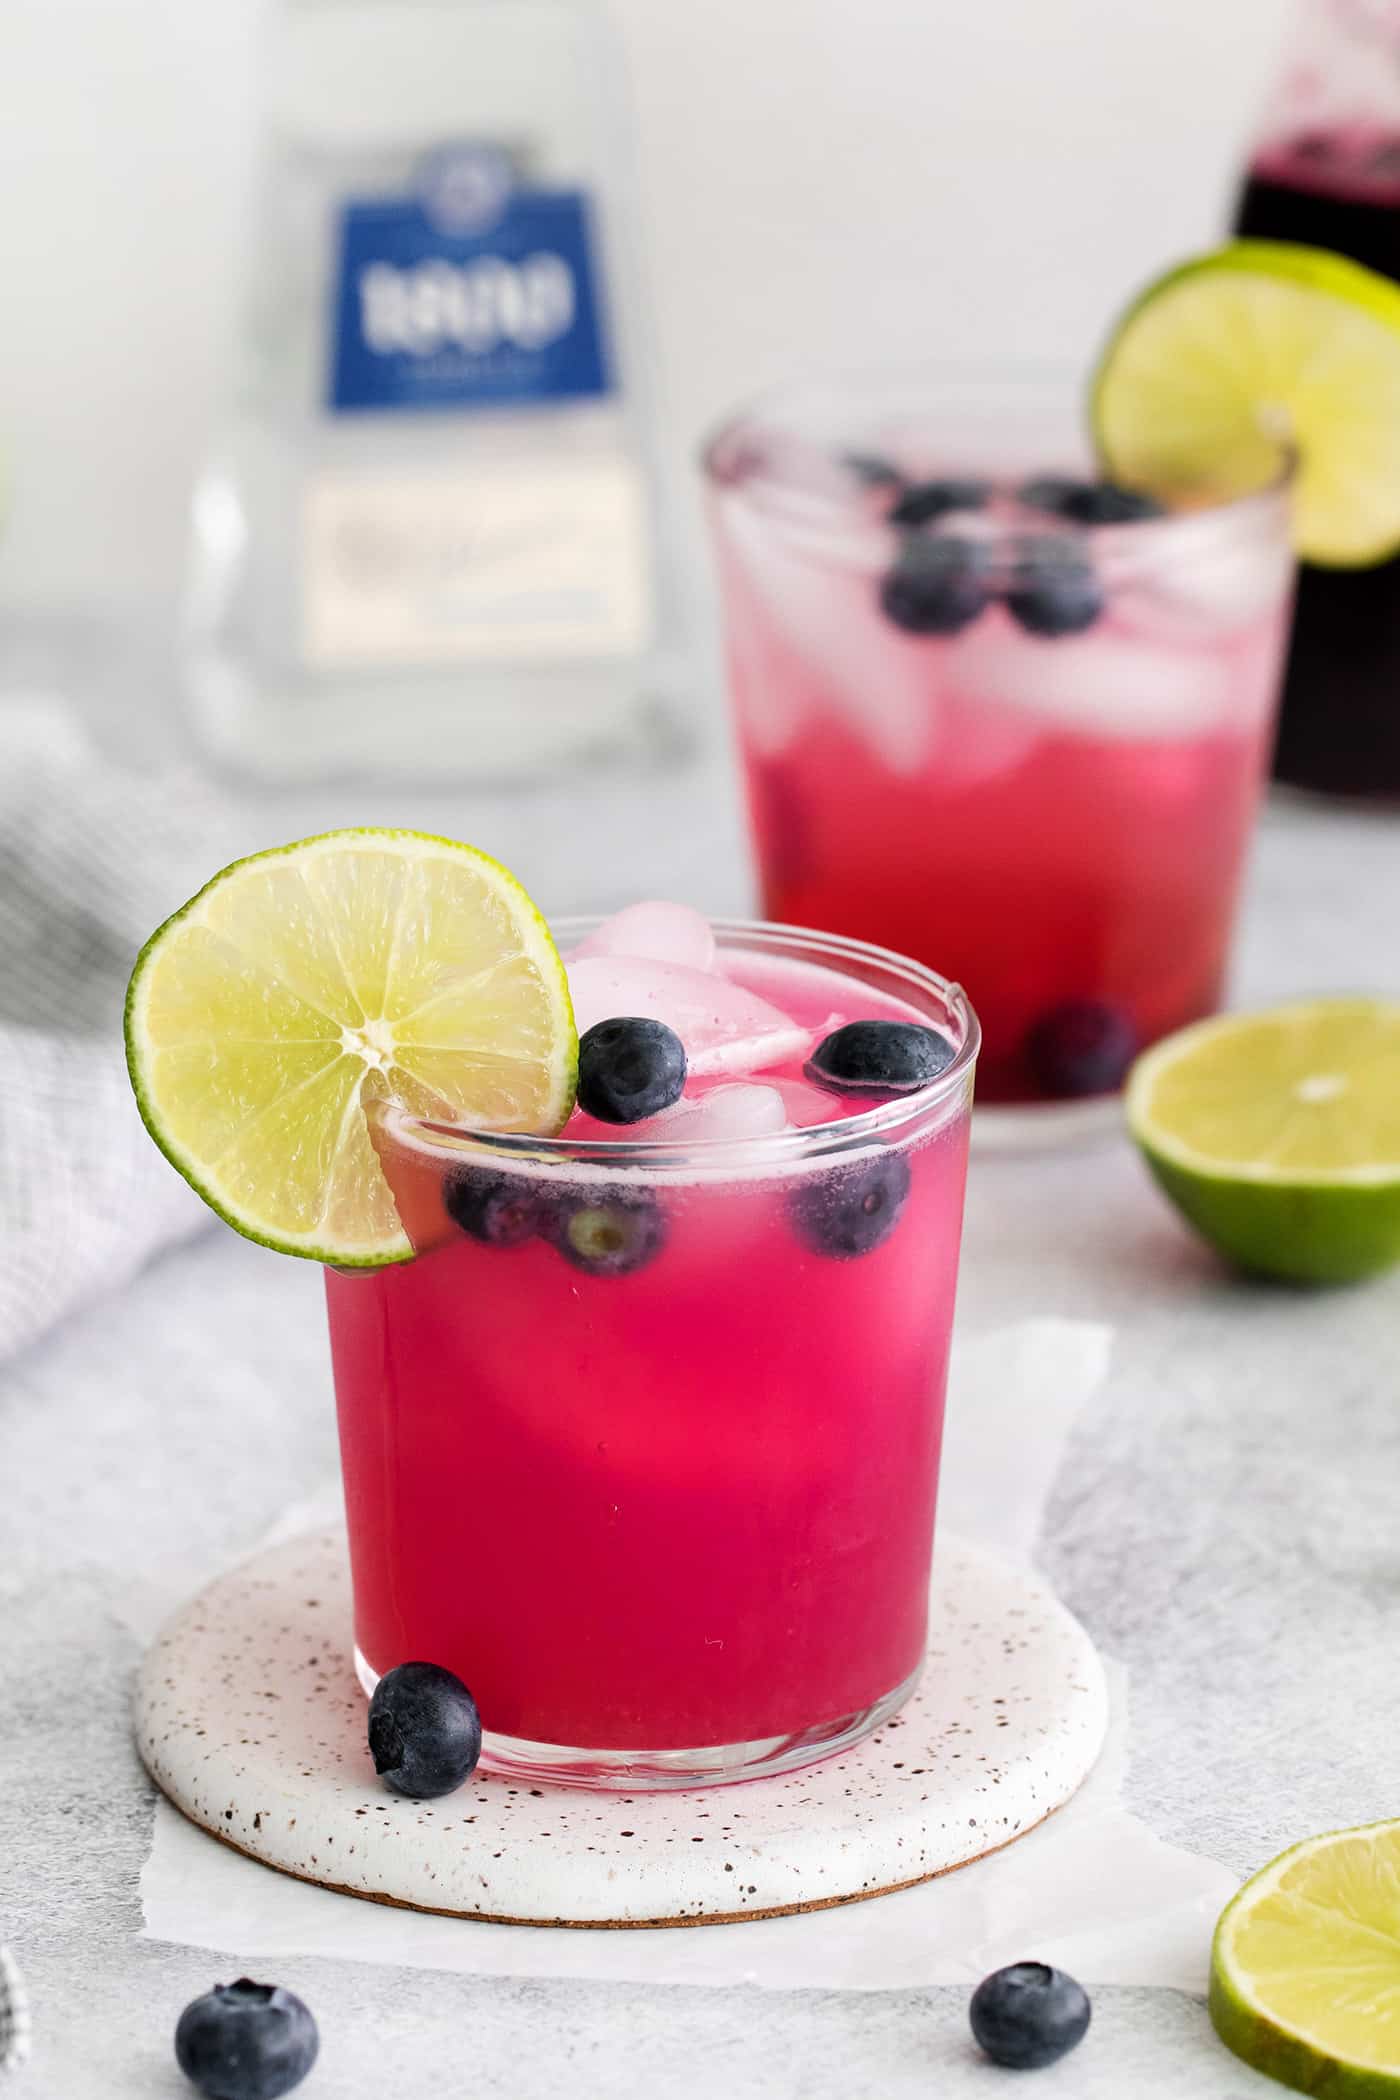 Angled view of a blueberry margarita with a lime slice